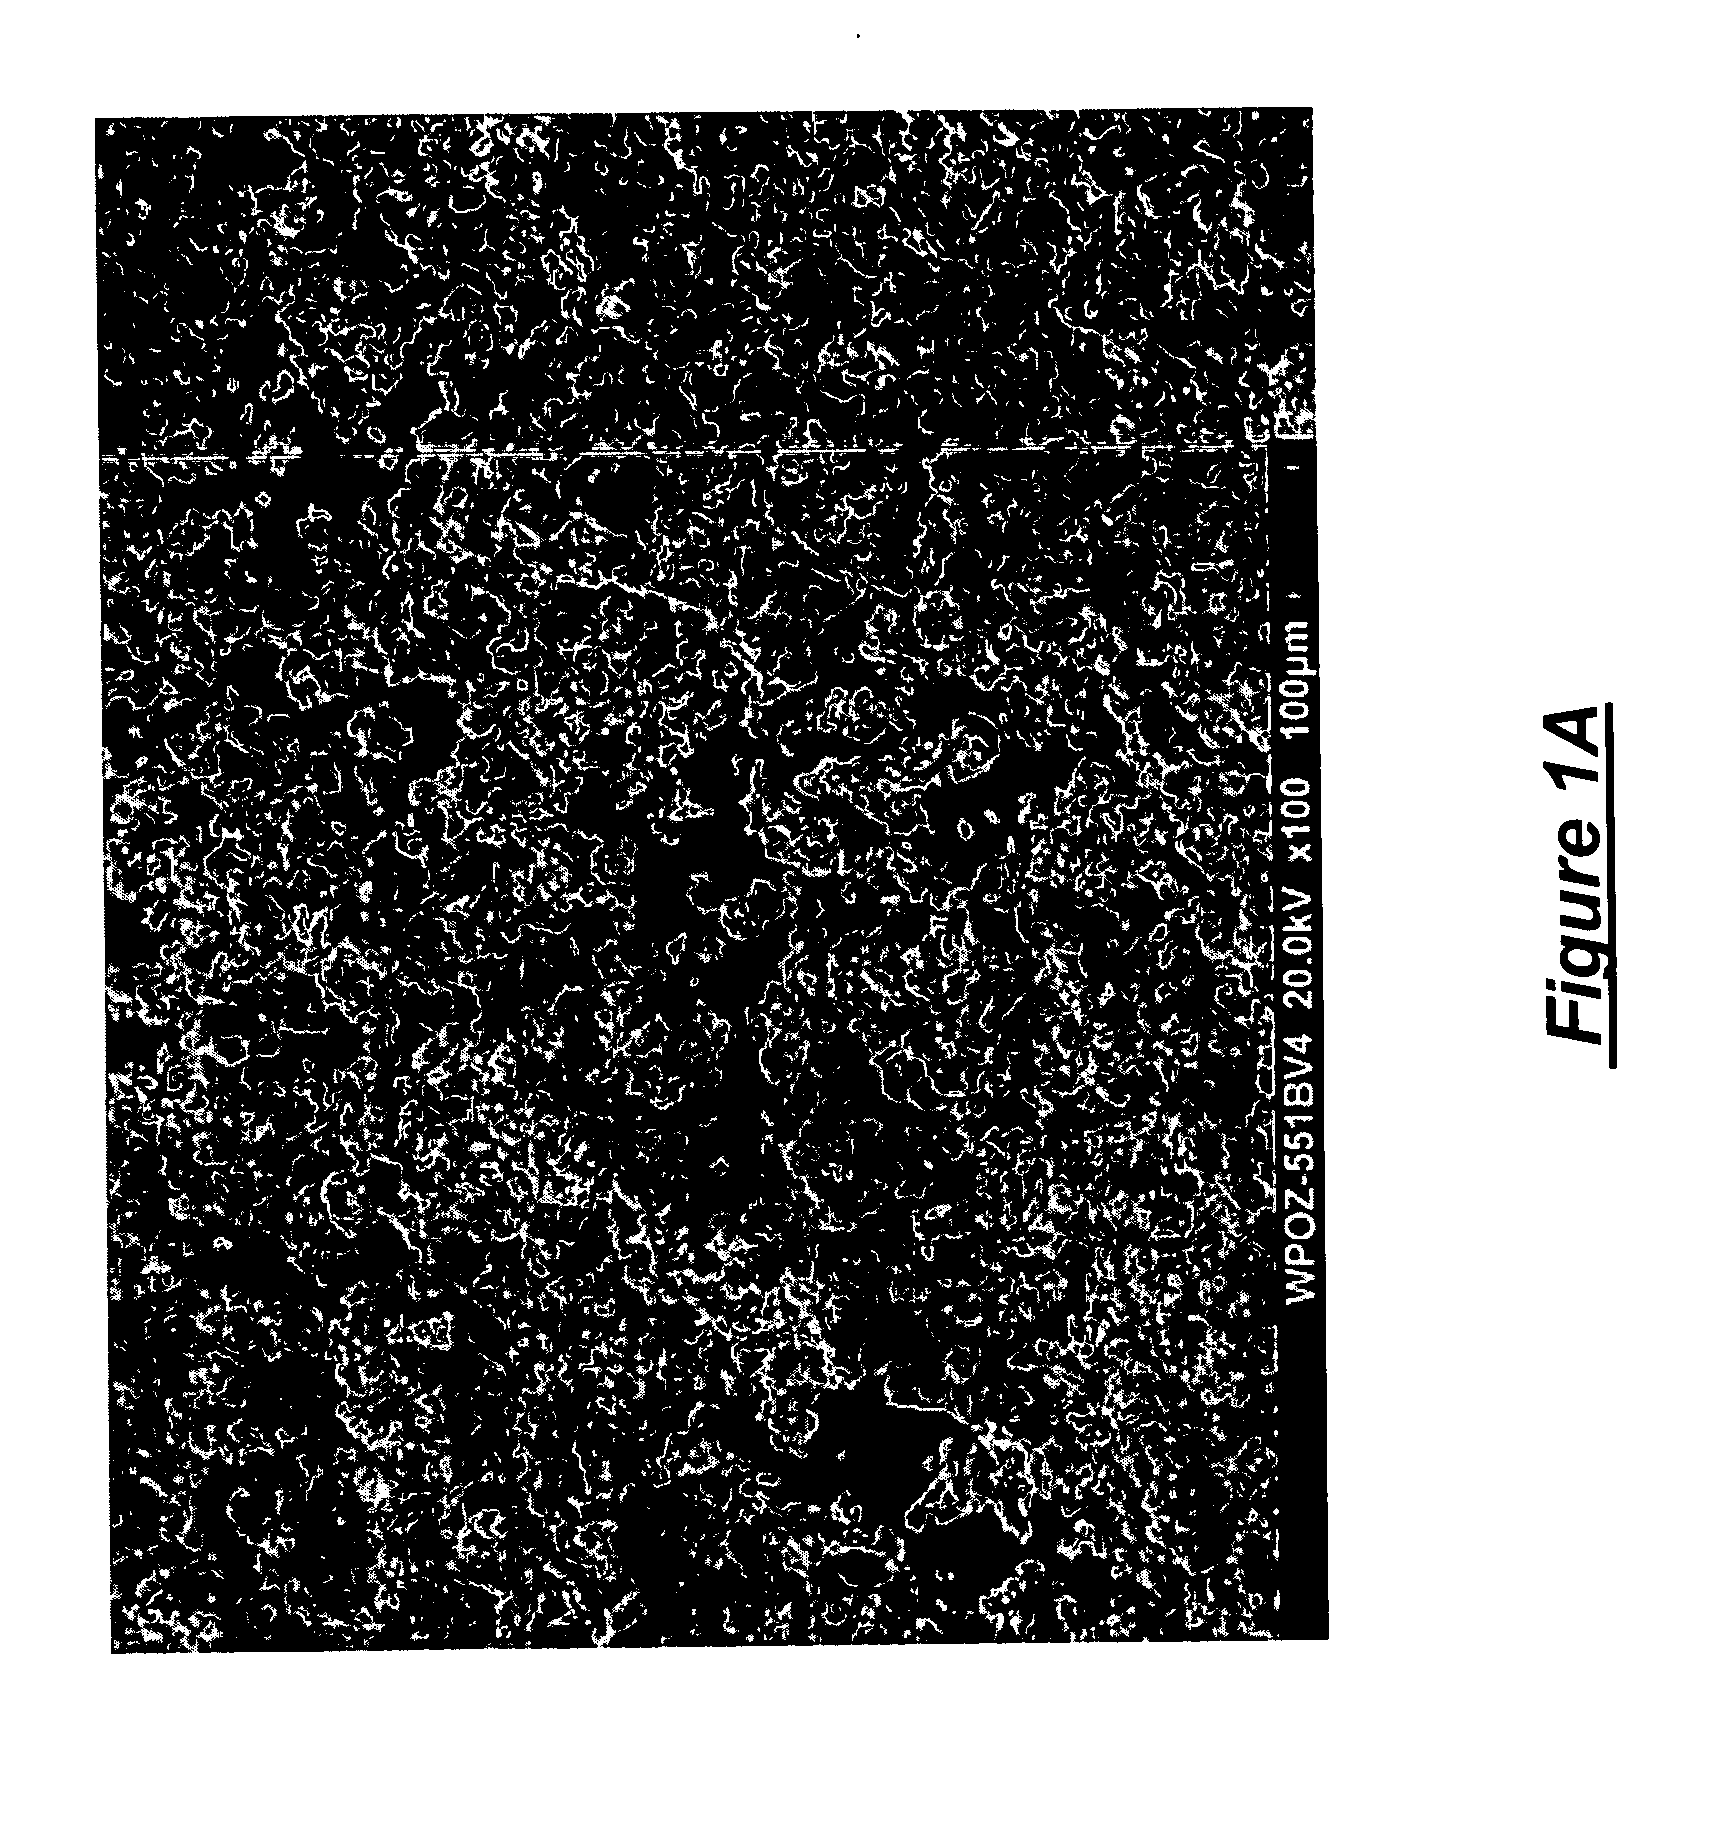 Method for formation of micro-prilled polymers